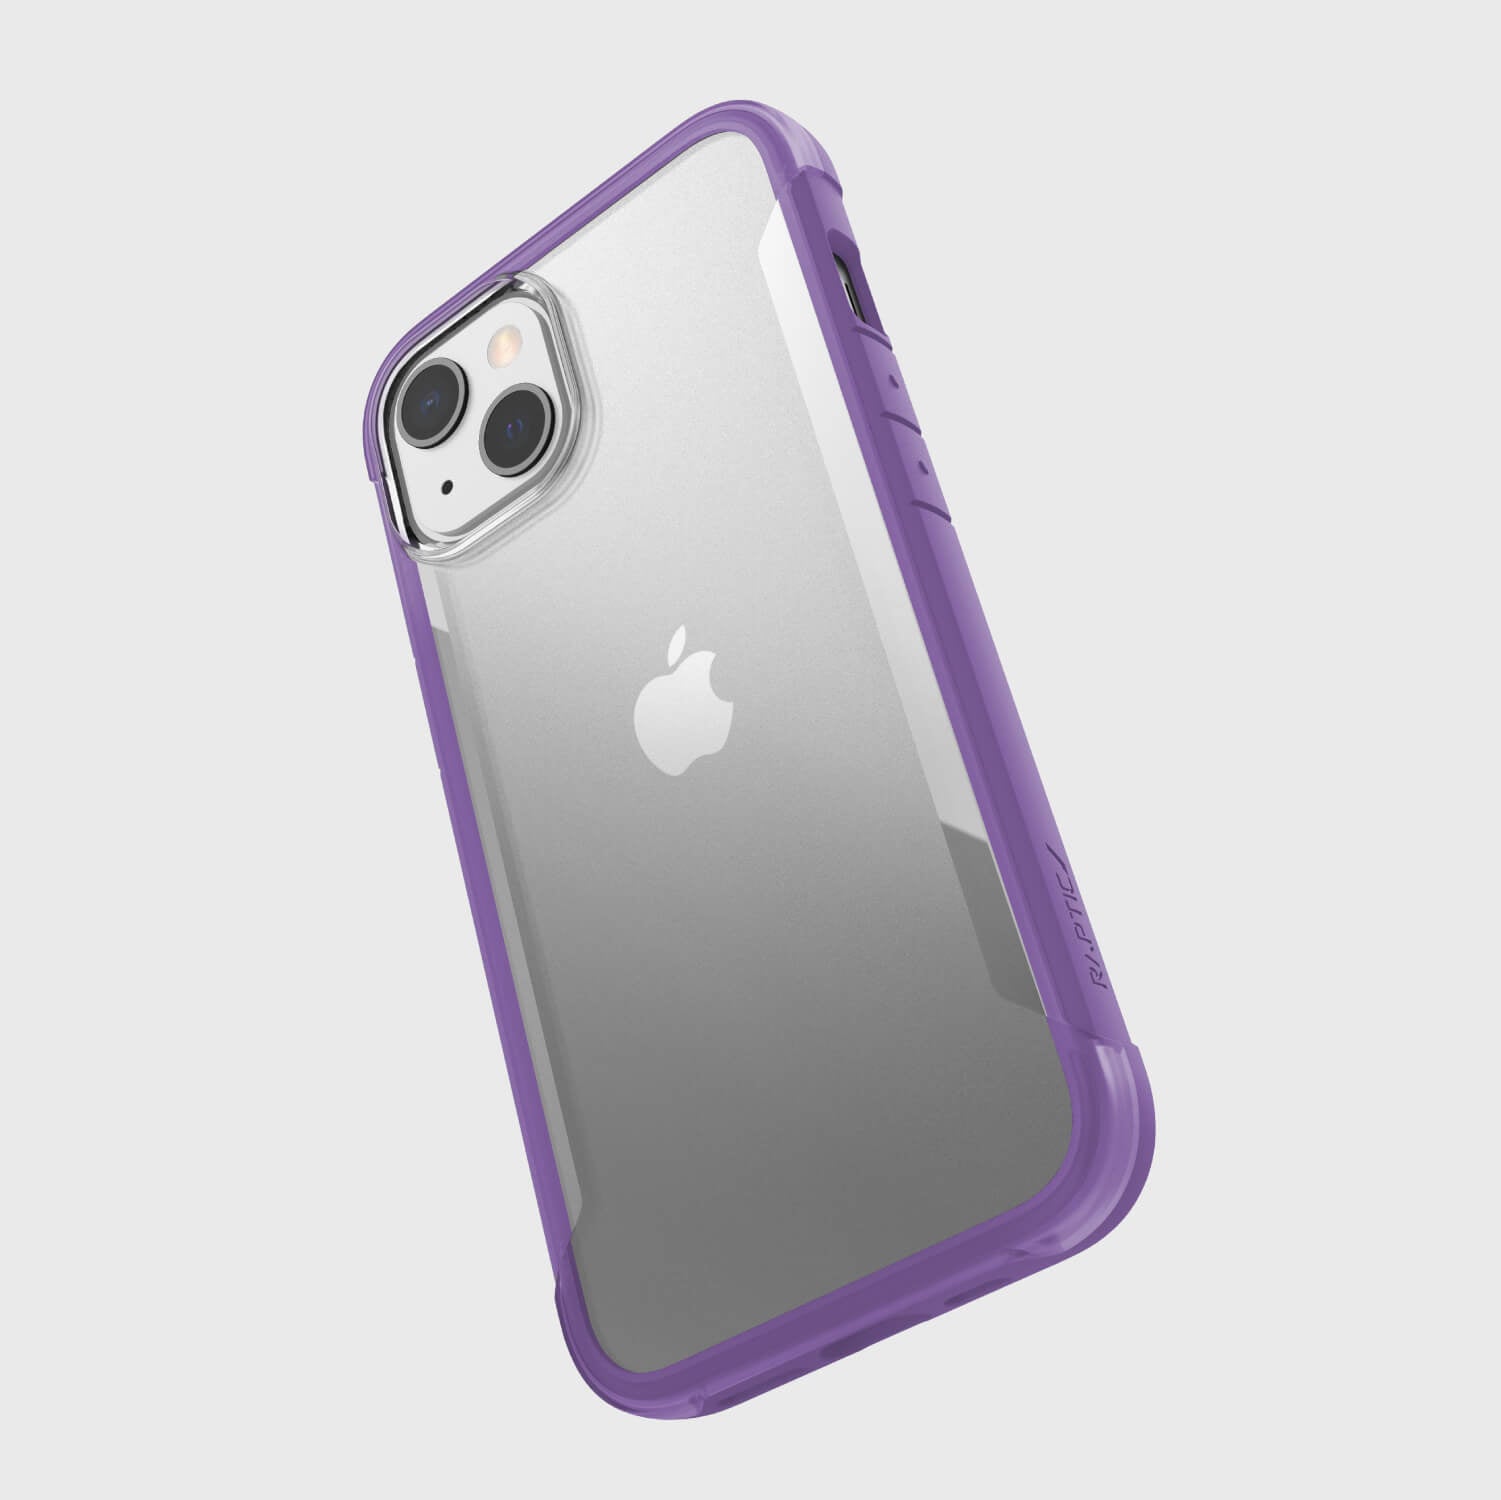 The eco-friendly back view of an iPhone 13 Case - TERRAIN in purple from Raptic.